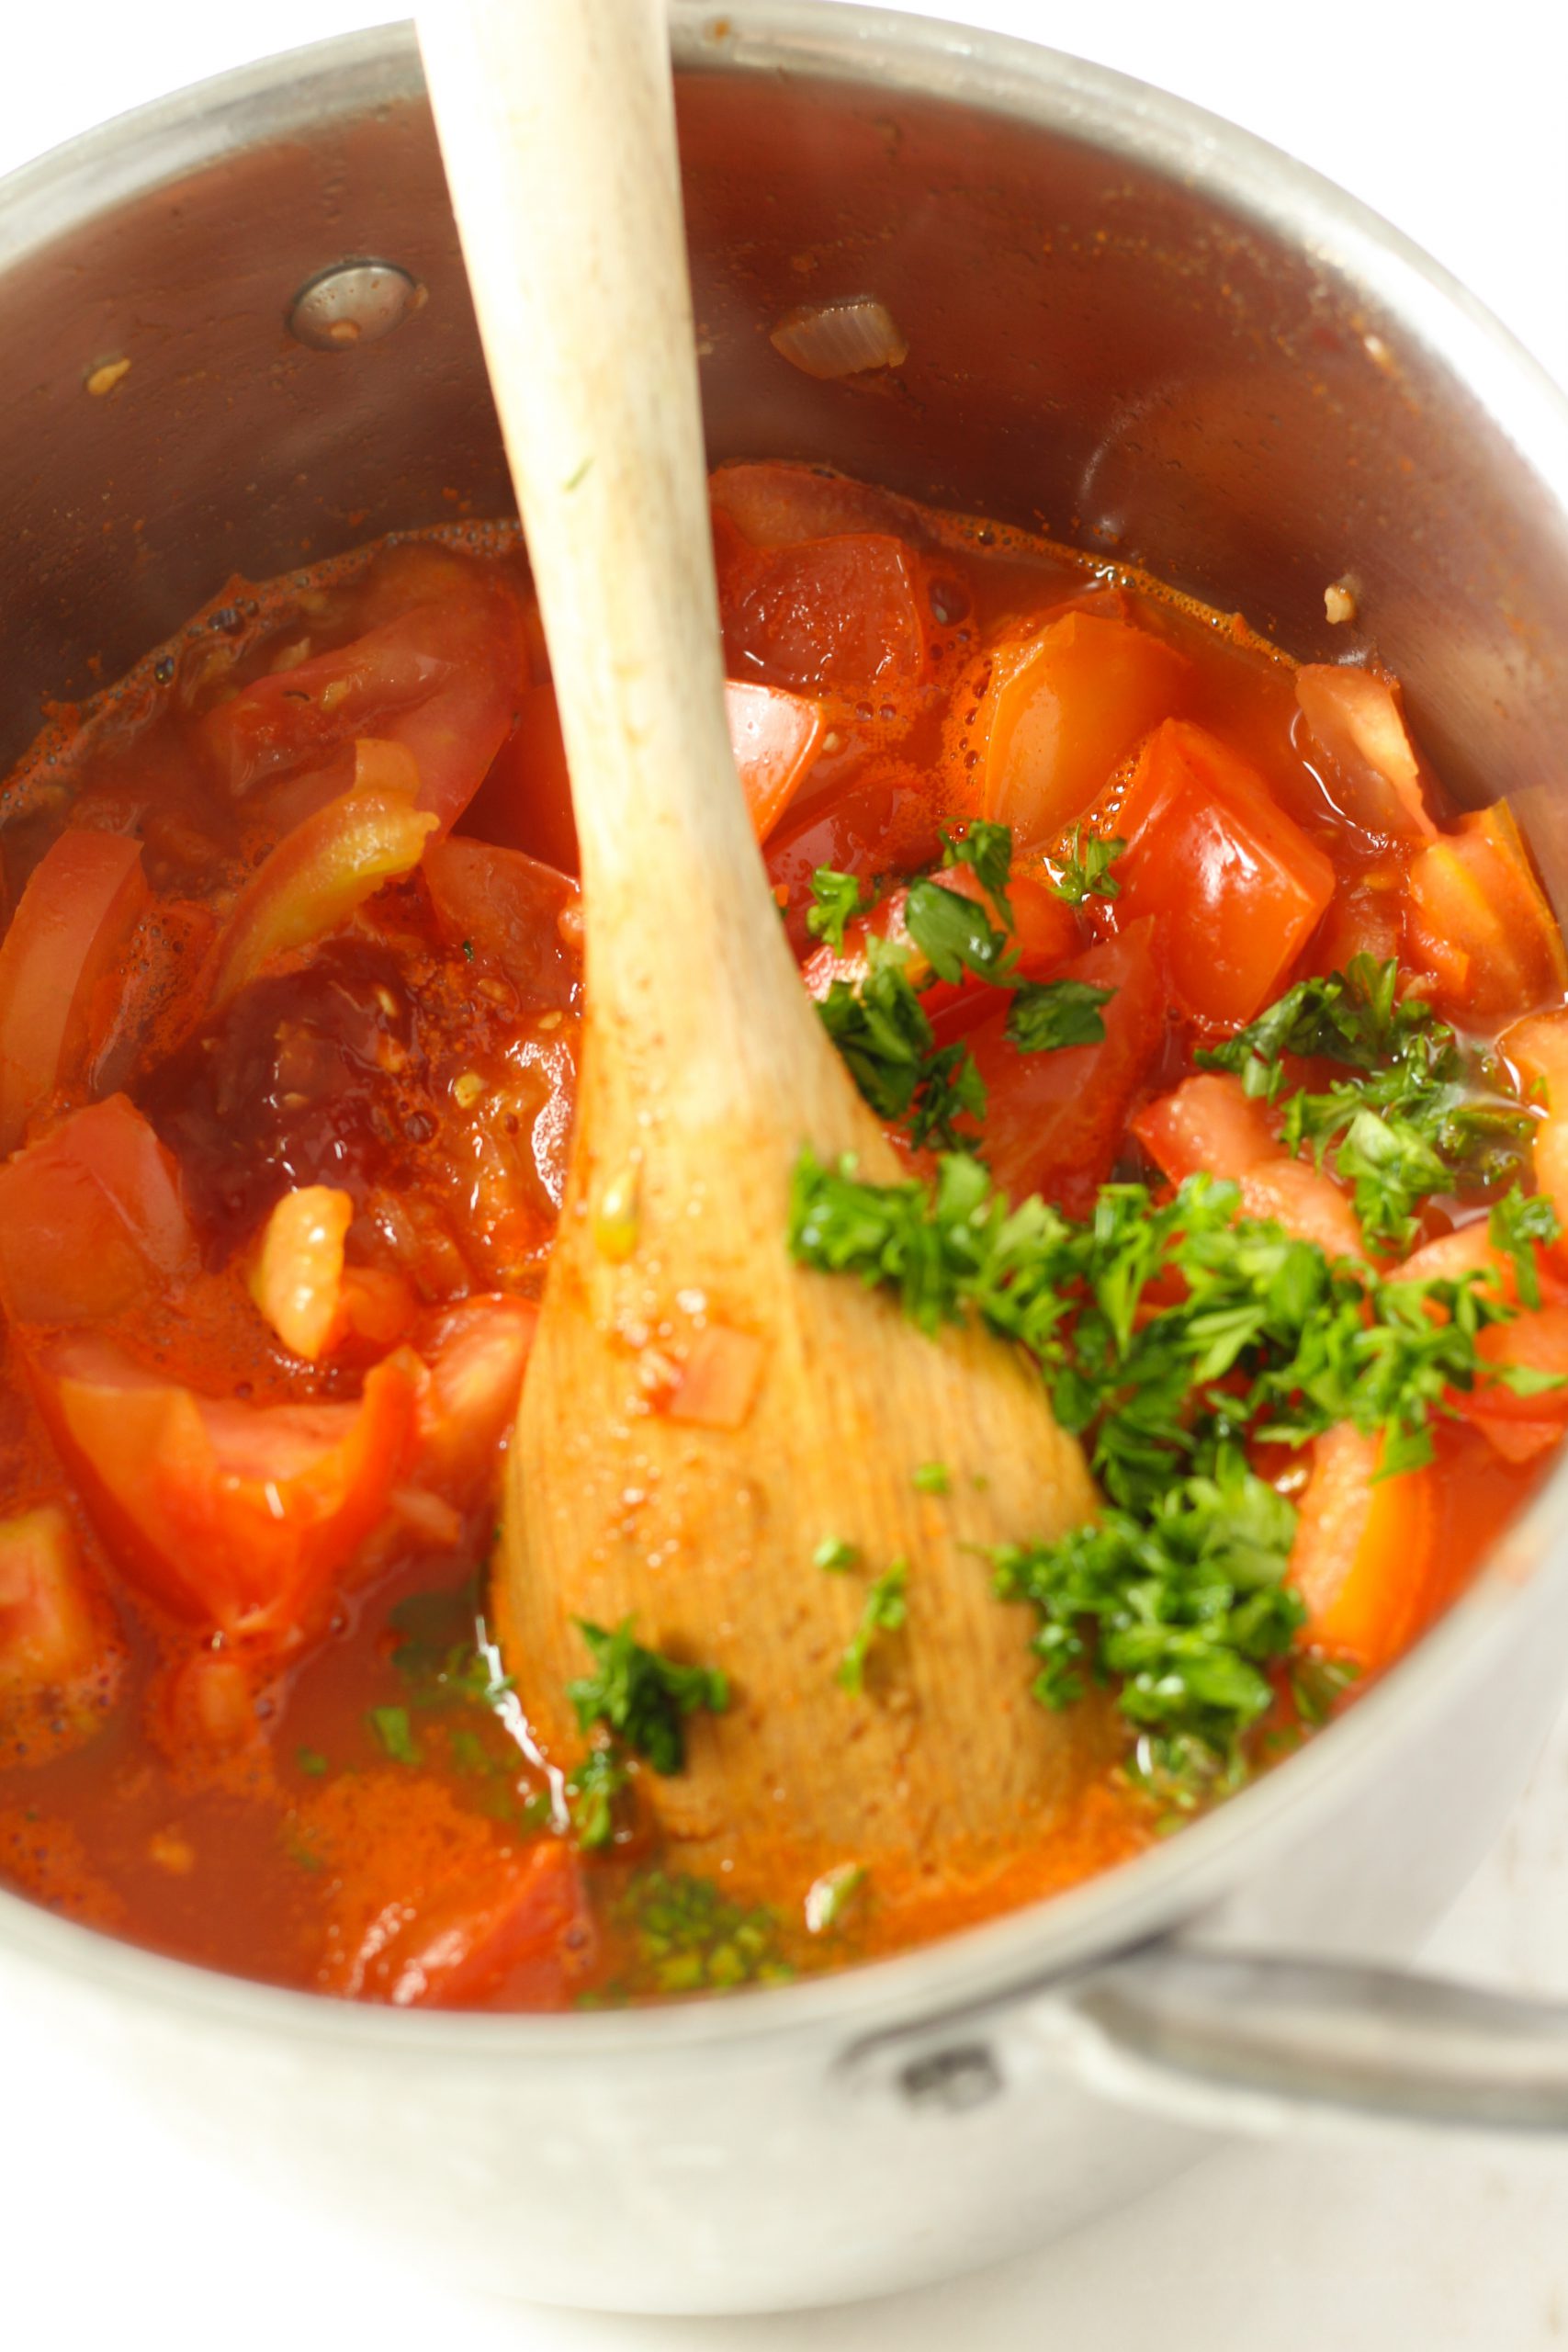 Added parsley and broth to the cooked tomatoes 